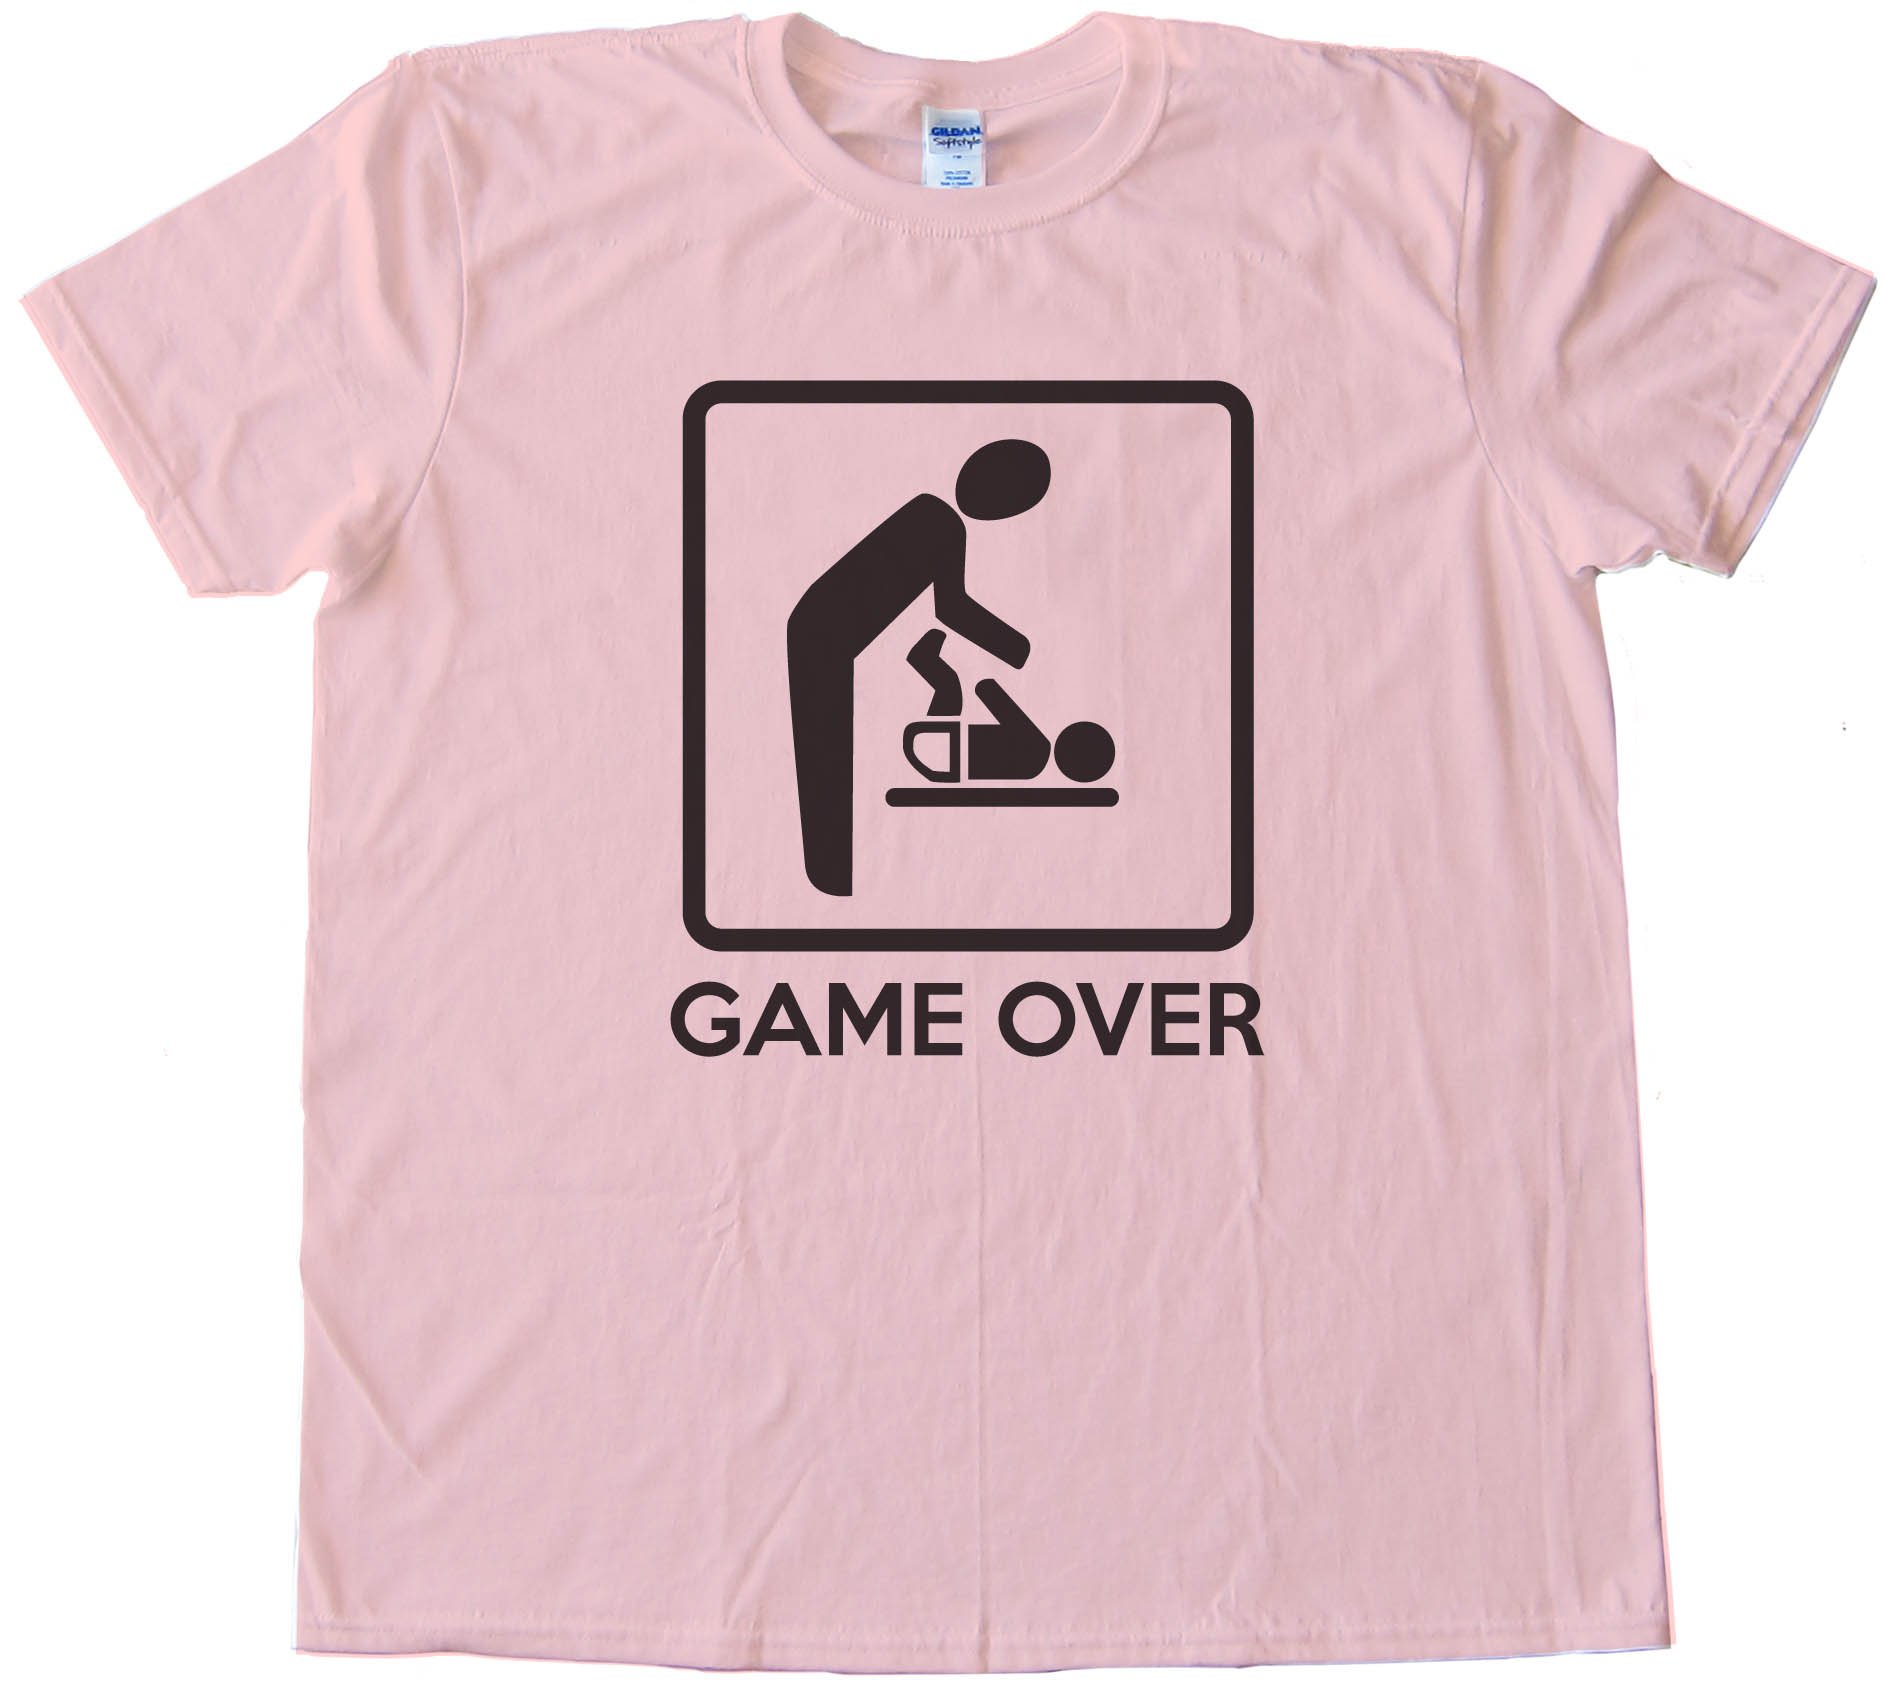 Game Over - New Father - Tee Shirt